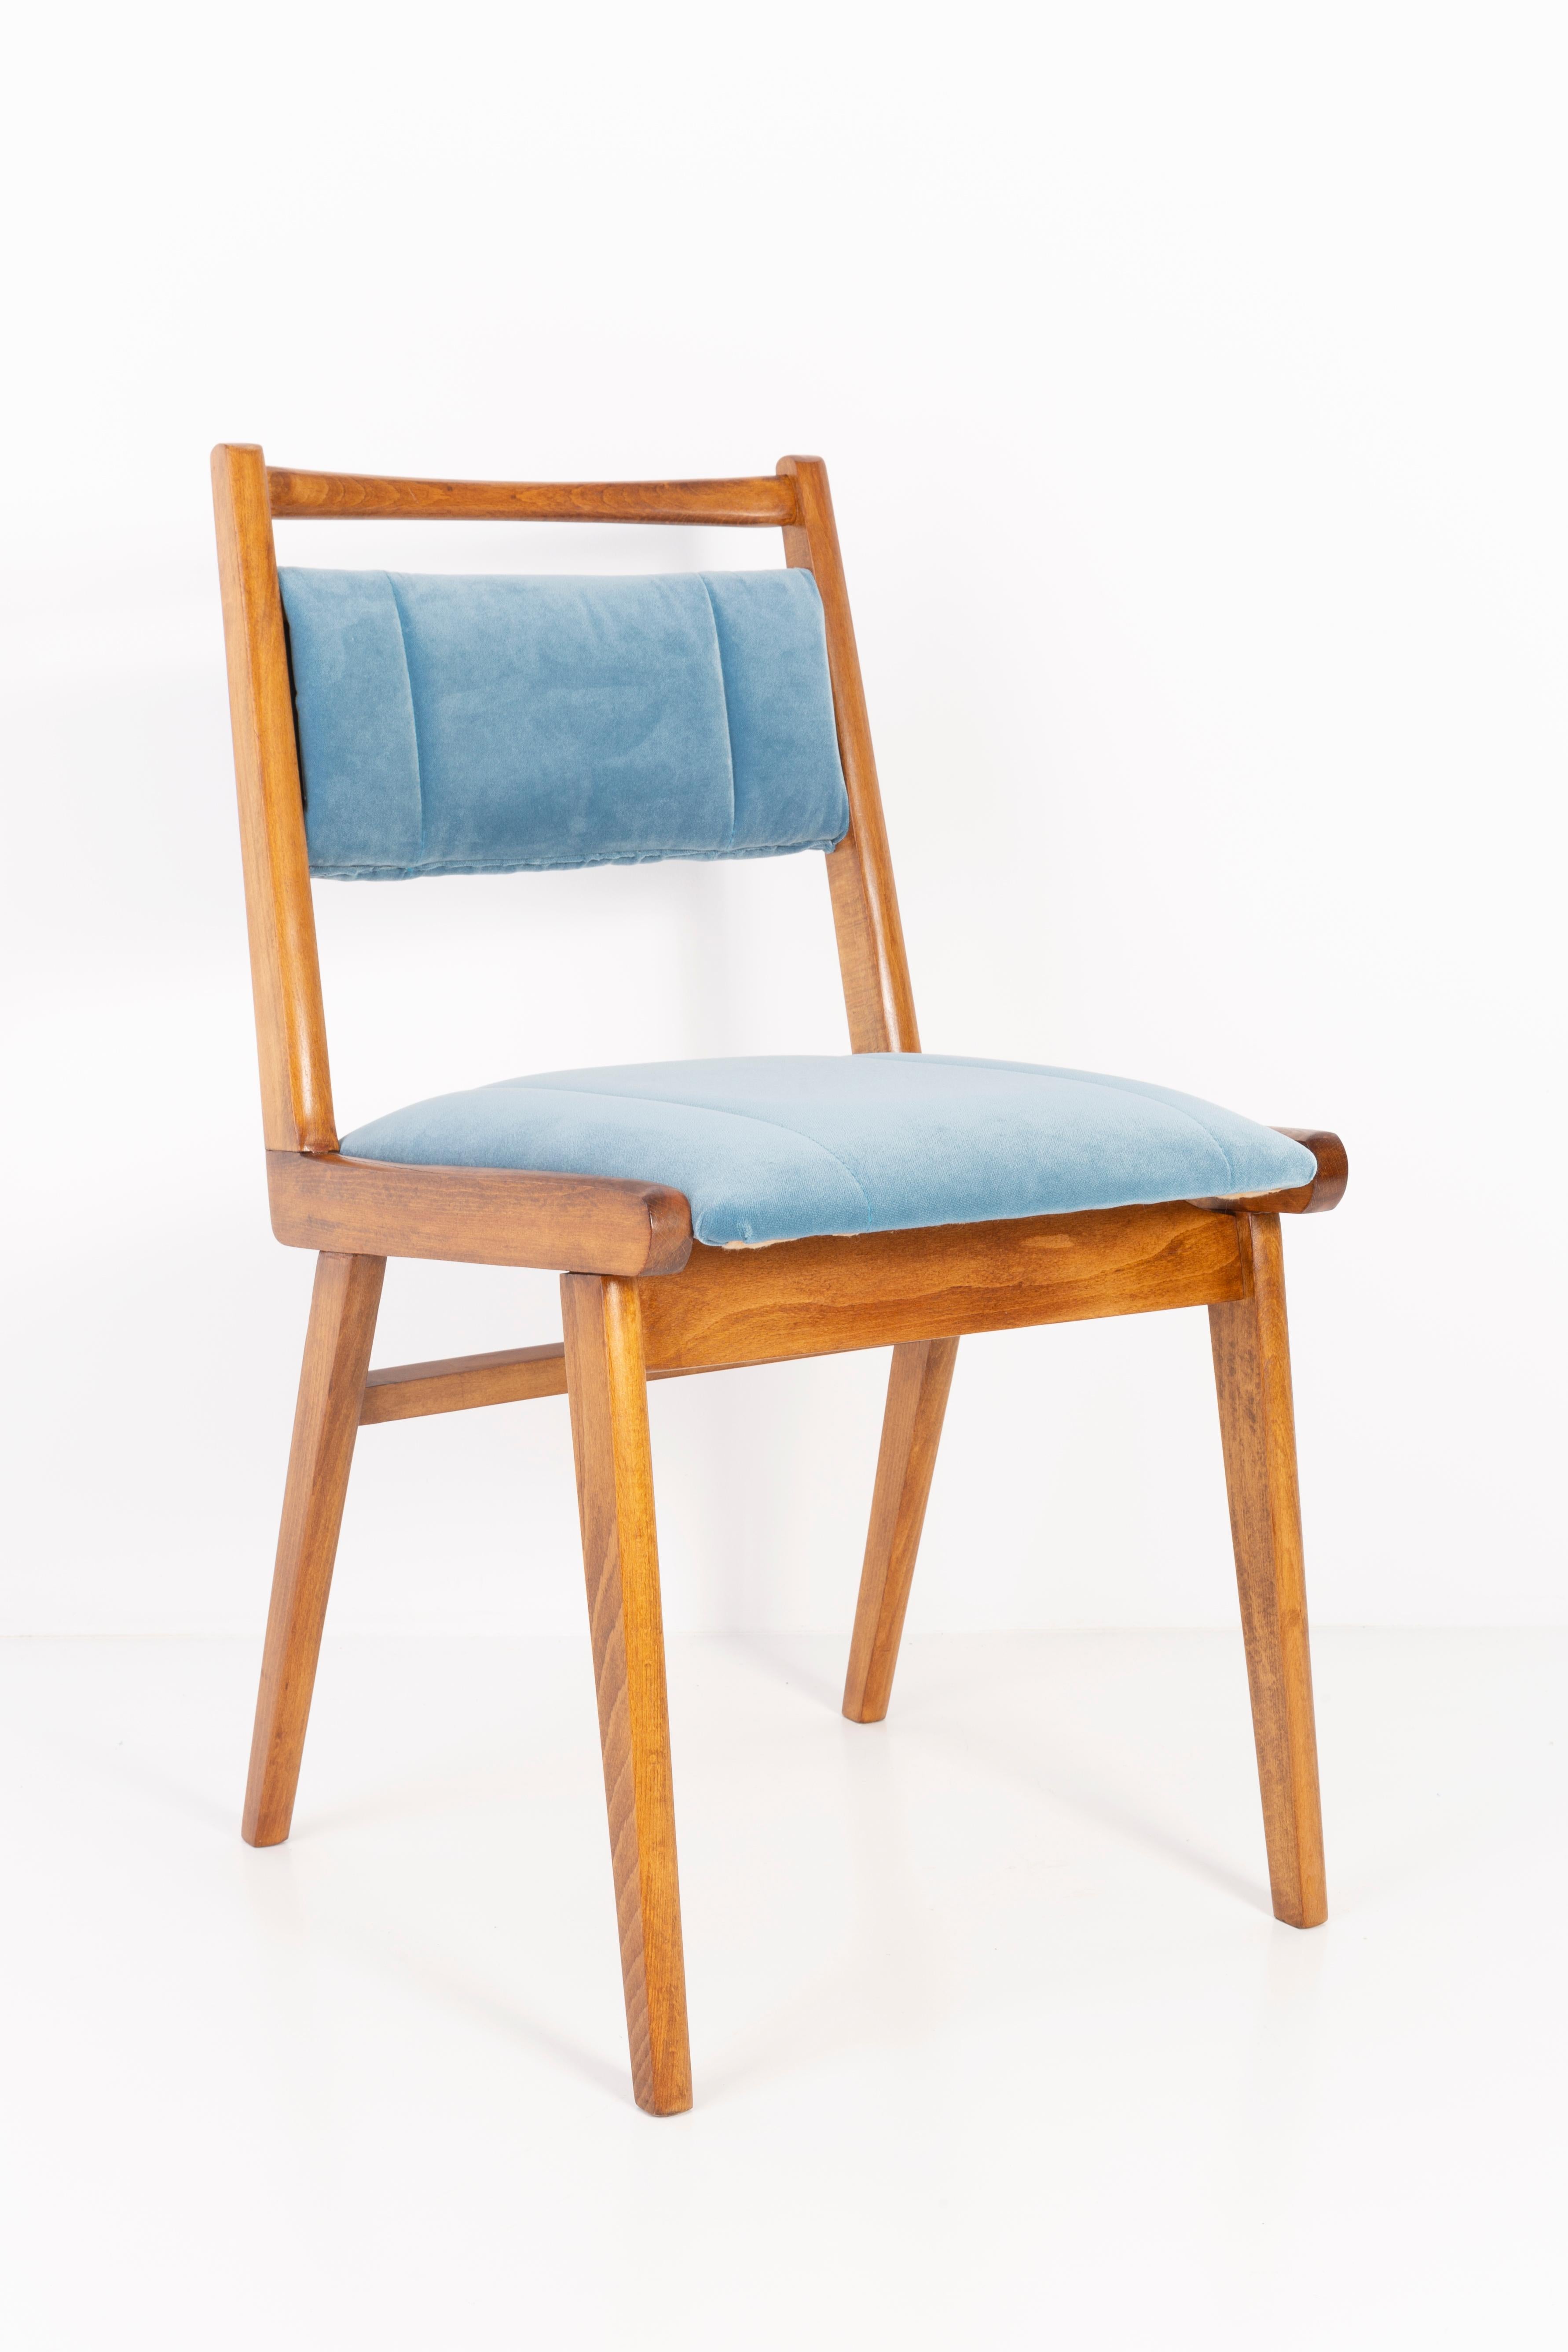 Chair designed by Prof. Rajmund Halas. It is JAR type model. Made of beechwood. Chair is after a complete upholstery renovation, the woodwork has been refreshed. Seat and back is dressed in a light blue (color 31), durable and pleasant to the touch